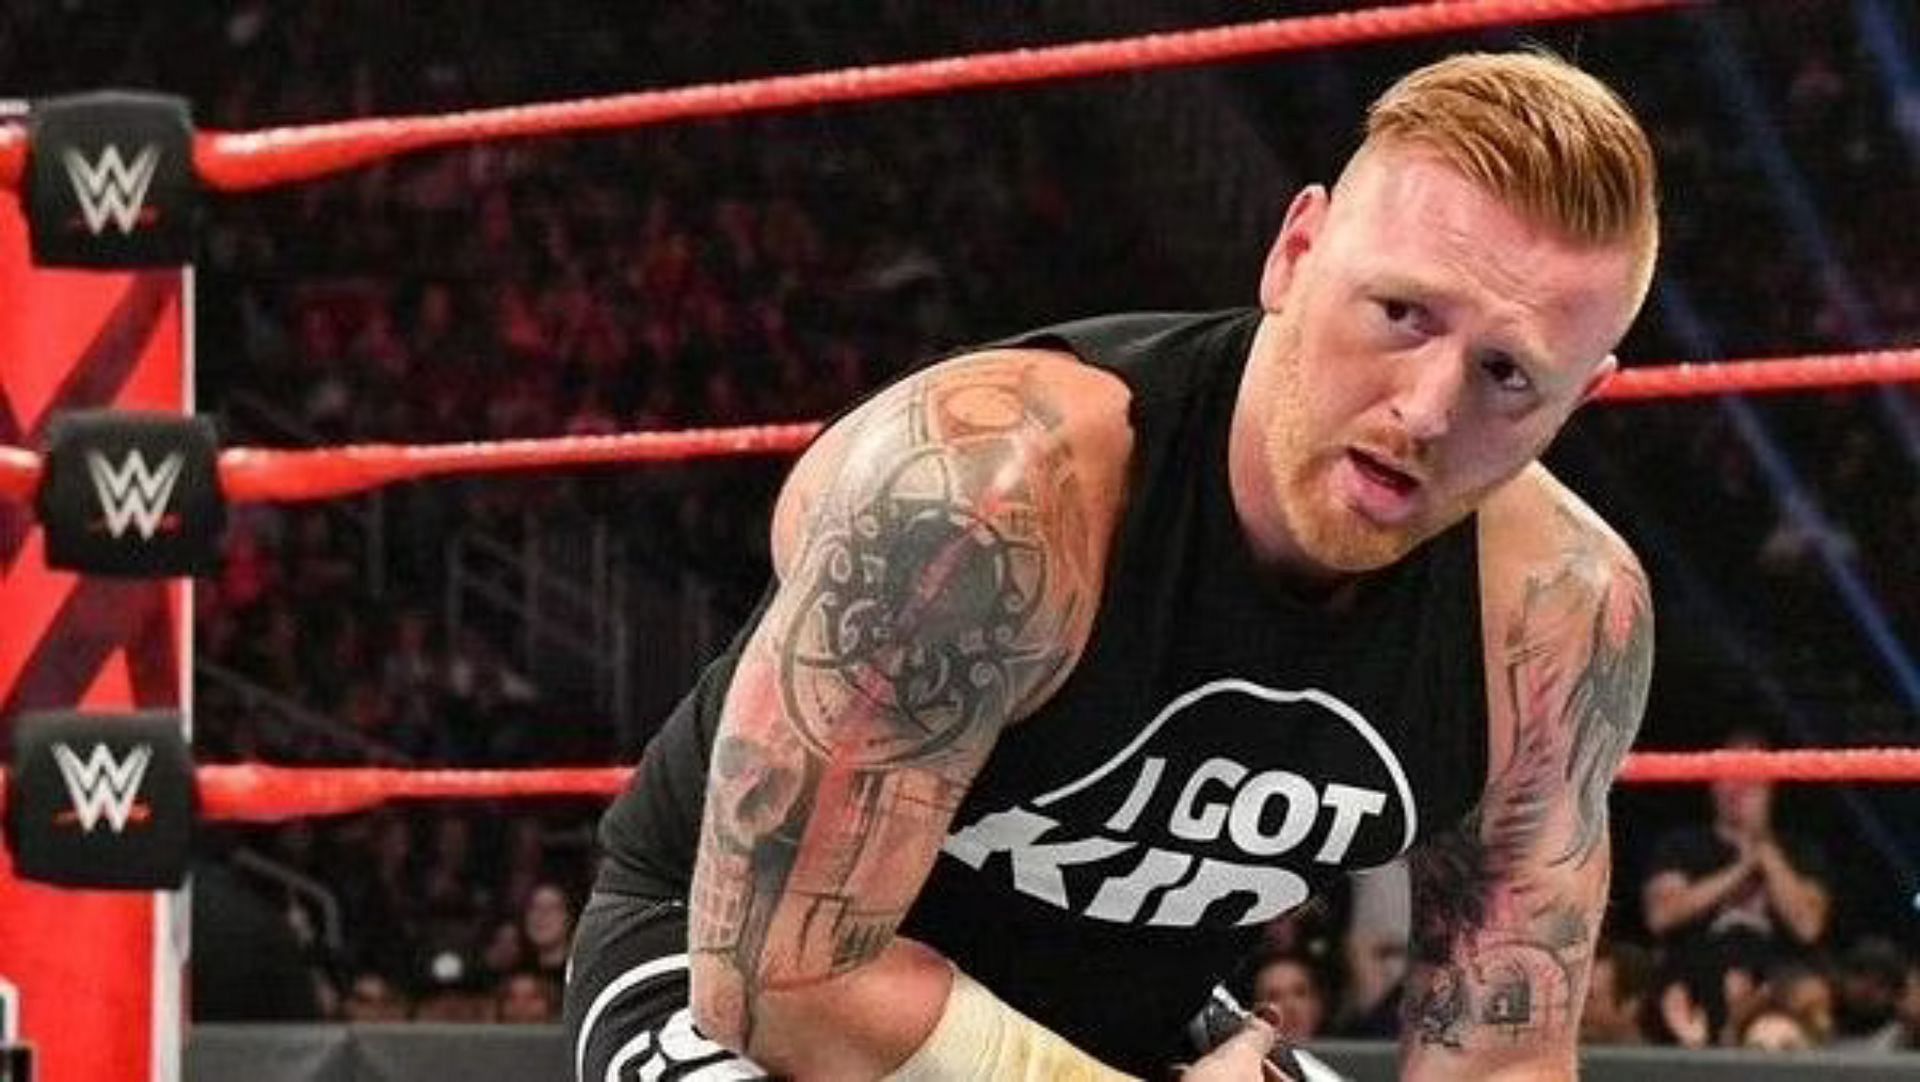 Heath Slater was skeptical about receiving a WWE legends finisher.